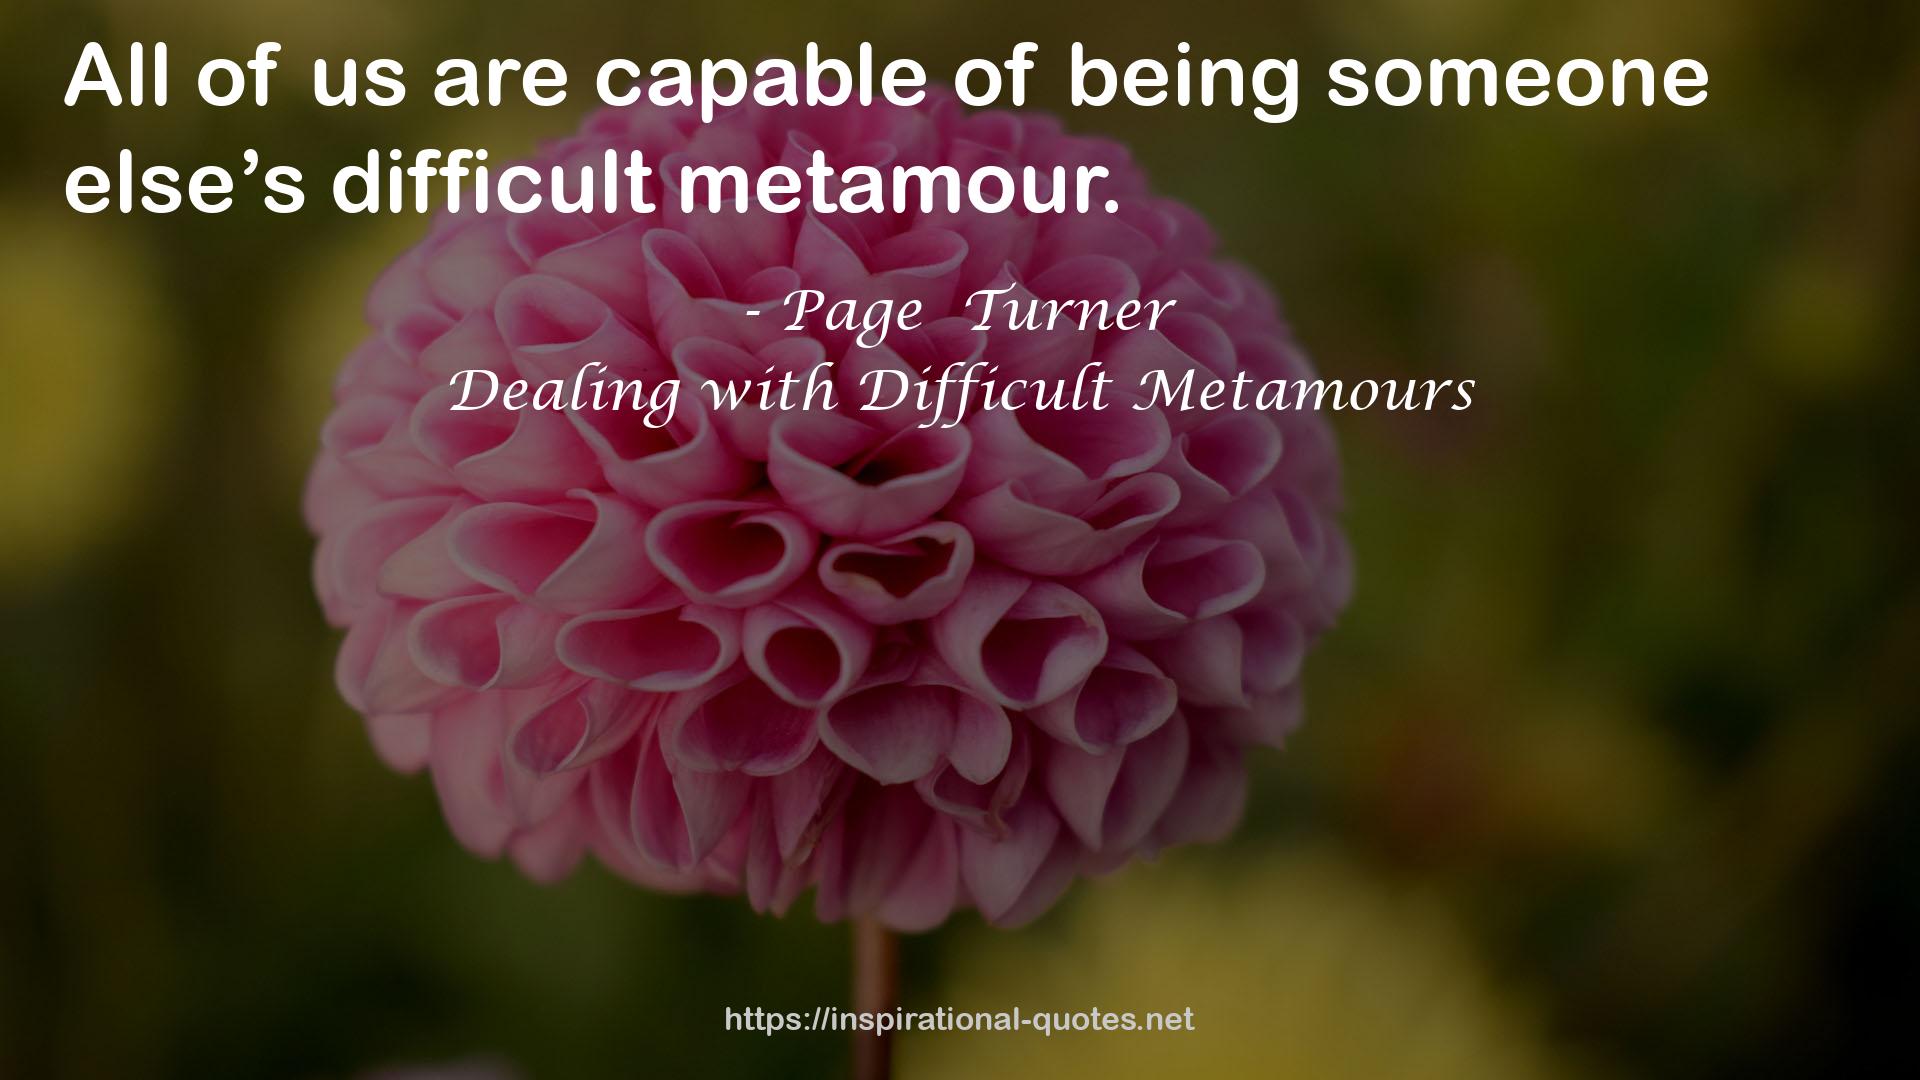 Dealing with Difficult Metamours QUOTES